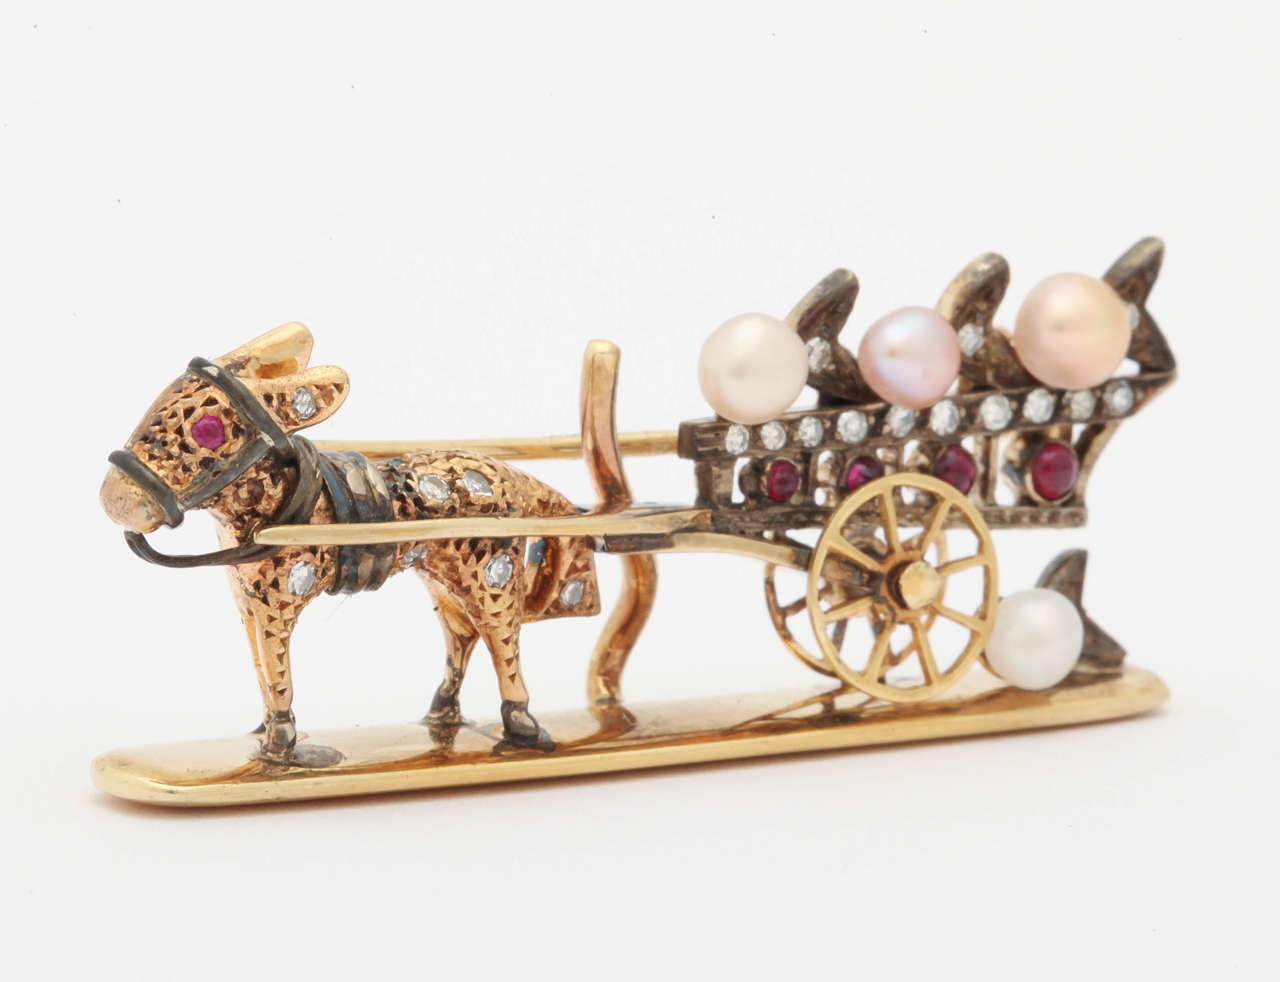 This lazy little donkey is pulling a cart loaded with diamonds and pearls.  The pin is made of 18 kt gold and silver, rubies, diamonds and pearls. There is a gooseneck hook at the back of the pin where a drop/pendant of pearls or stones  or anything